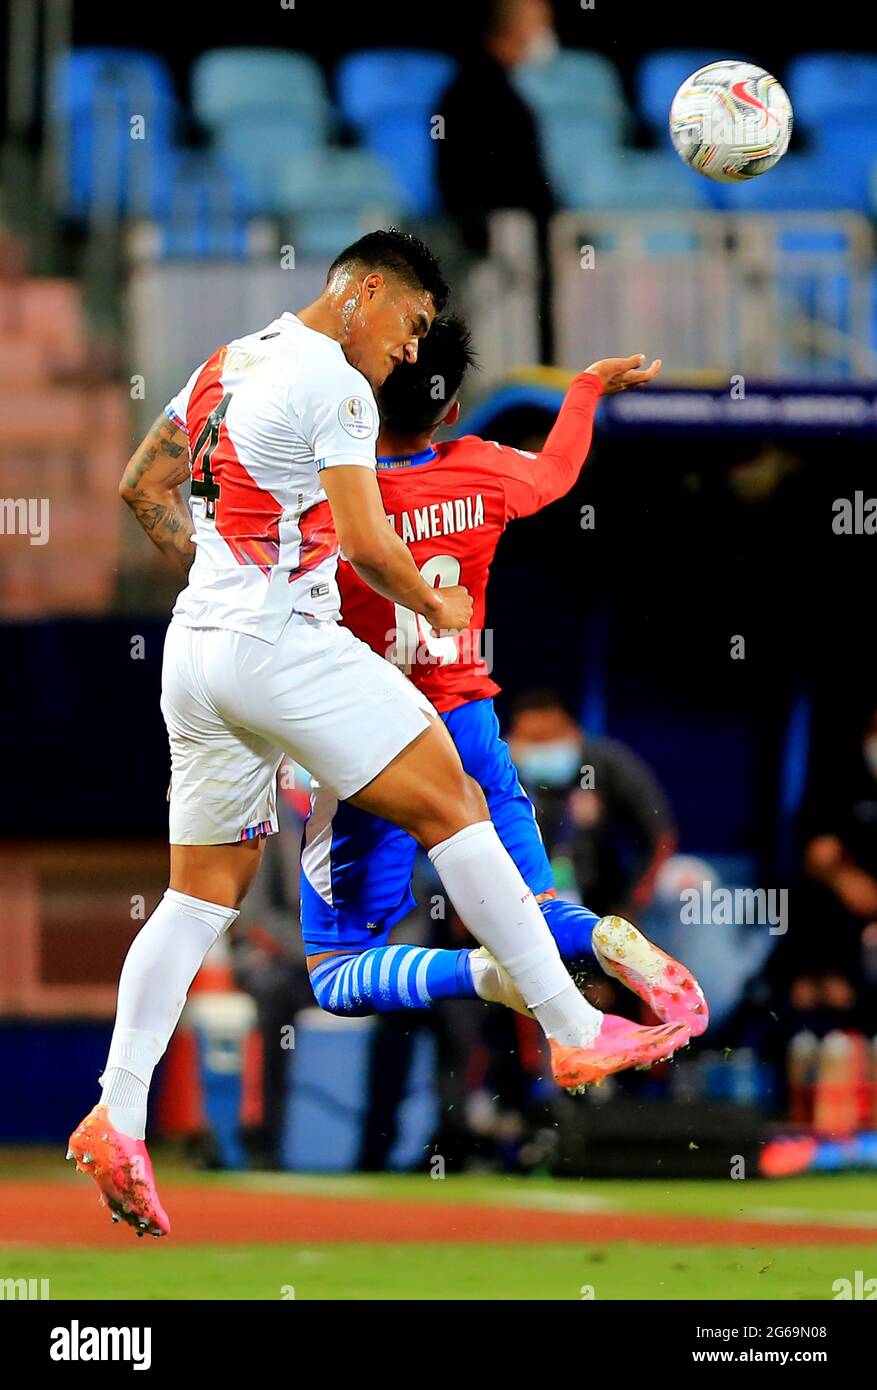 GOIANIA, BRAZIL - JULY 02: Anderson Santamaria of Peru head the ball against Santiago Arzamendia of Paraguay ,during the Quarterfinal match between Peru and Paraguay as part of Conmebol Copa America Brazil 2021 at Estadio Olimpico on July 2, 2021 in Goiania, Brazil. (MB Media) Stock Photo